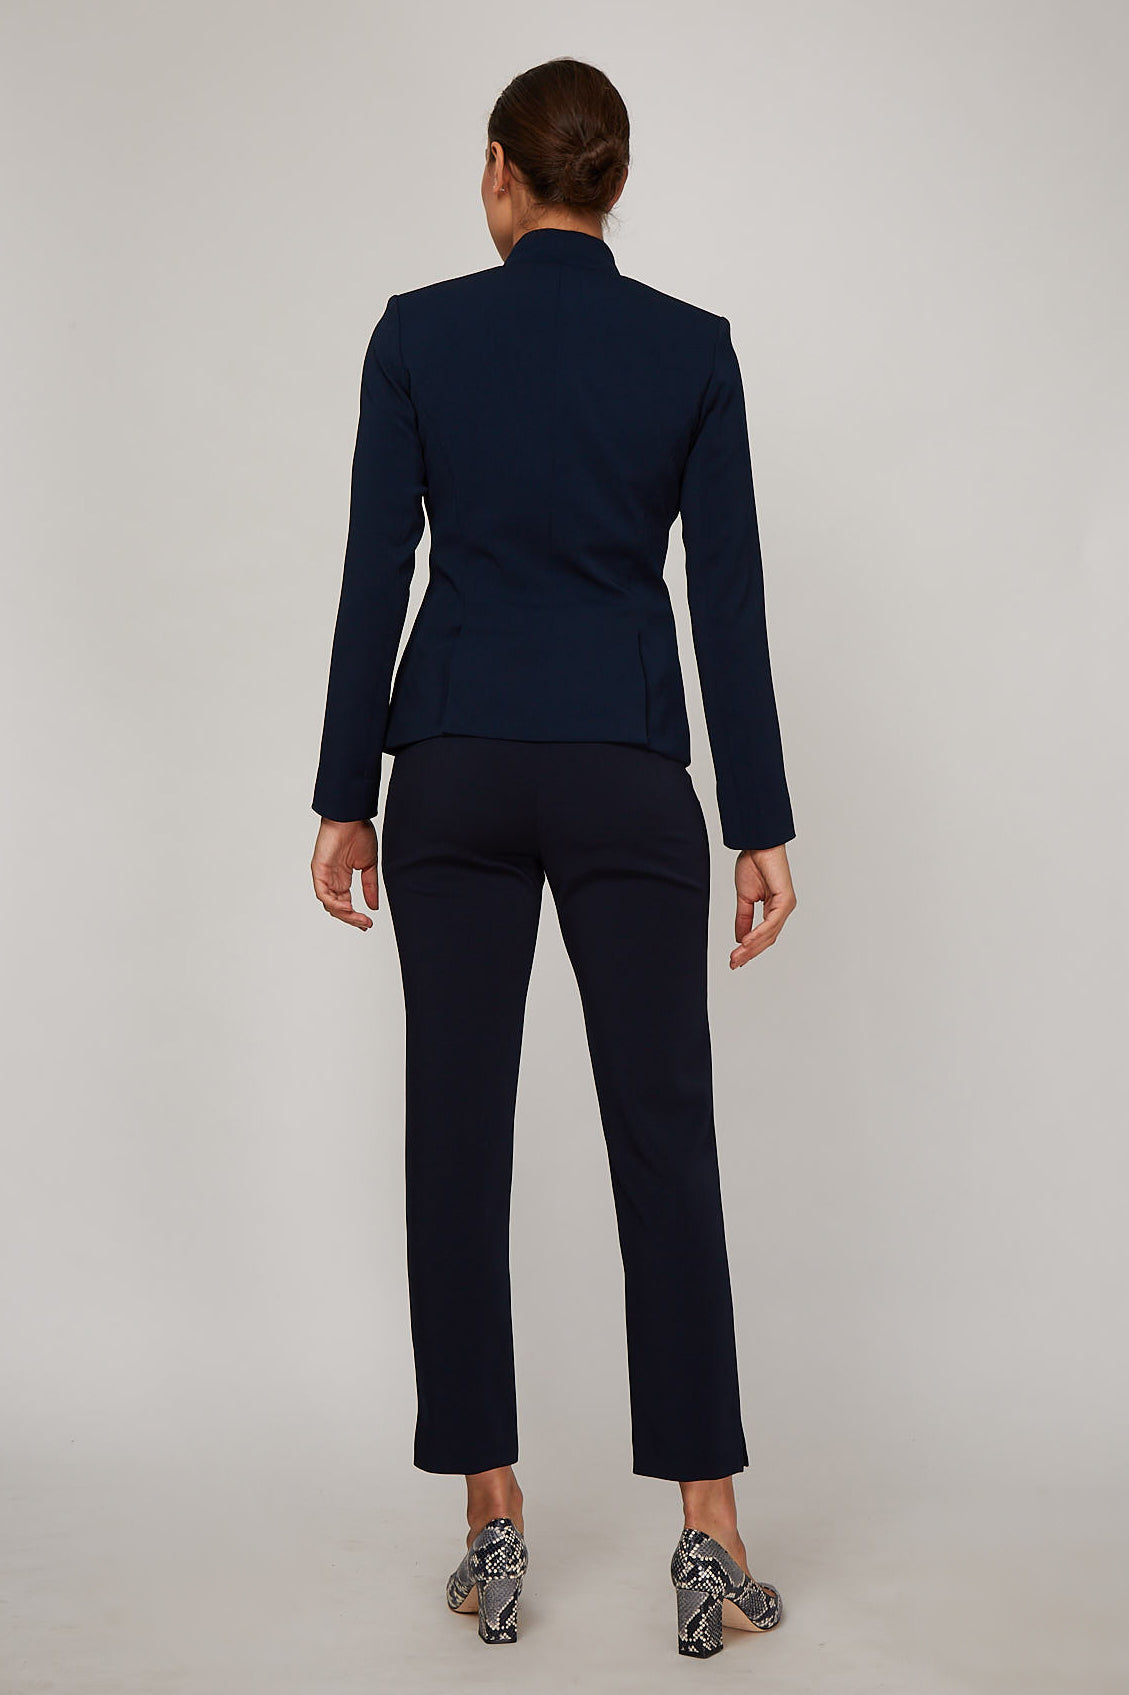 Women' Business Willow Blazer - Navy NORA GARDNER | OFFICIAL STORE for work and office